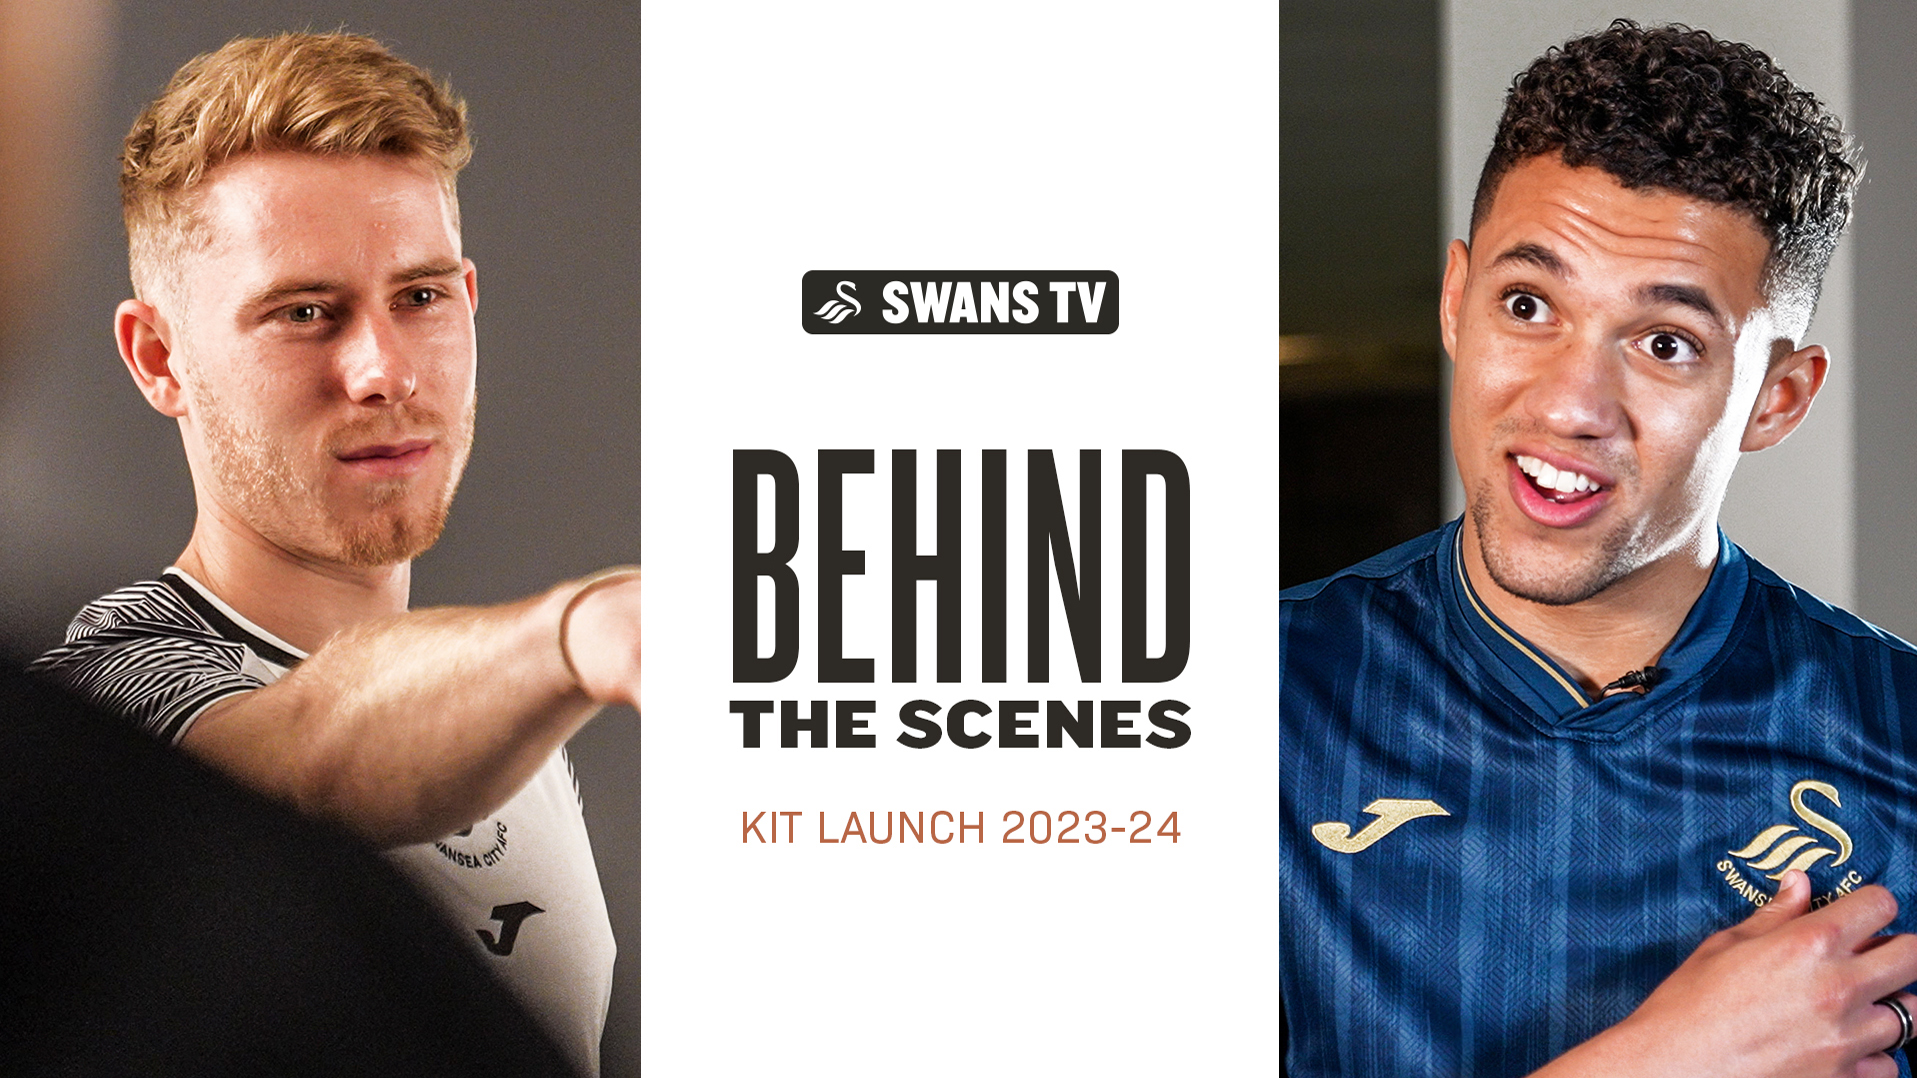 Kit Launch Behind the Scenes